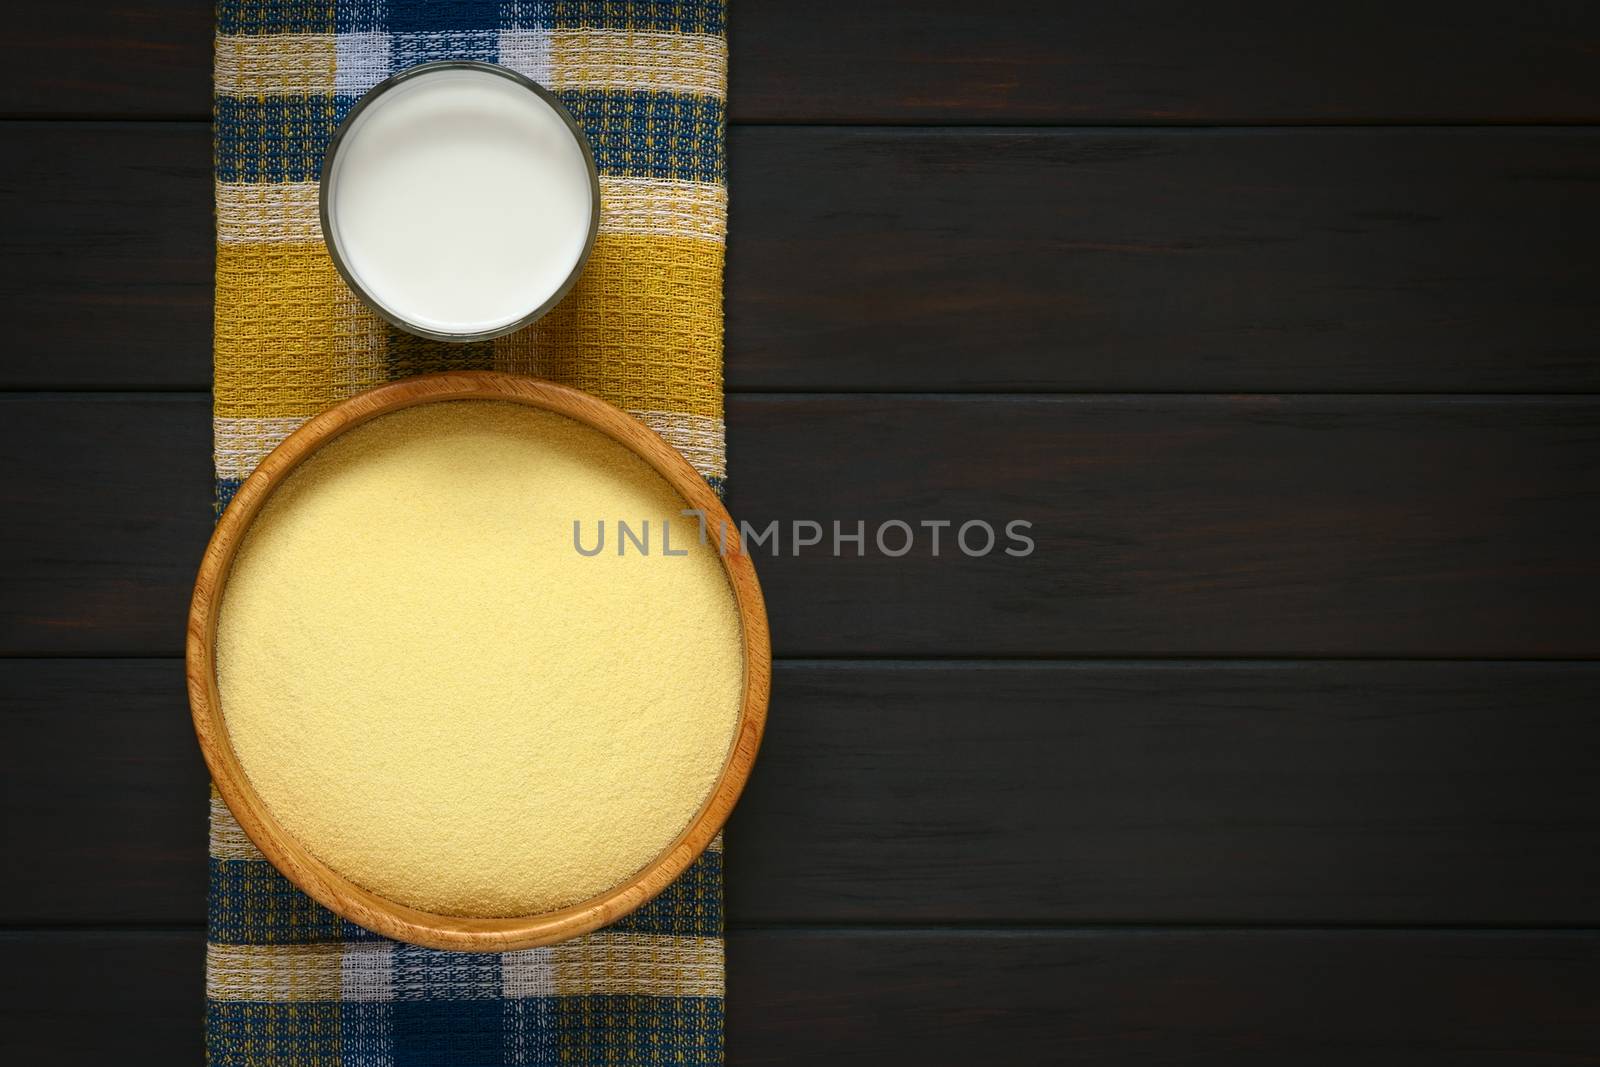 Overhead shot of raw semolina in wooden bowl with a glass of milk on cloth, photographed on dark wood with natural light  